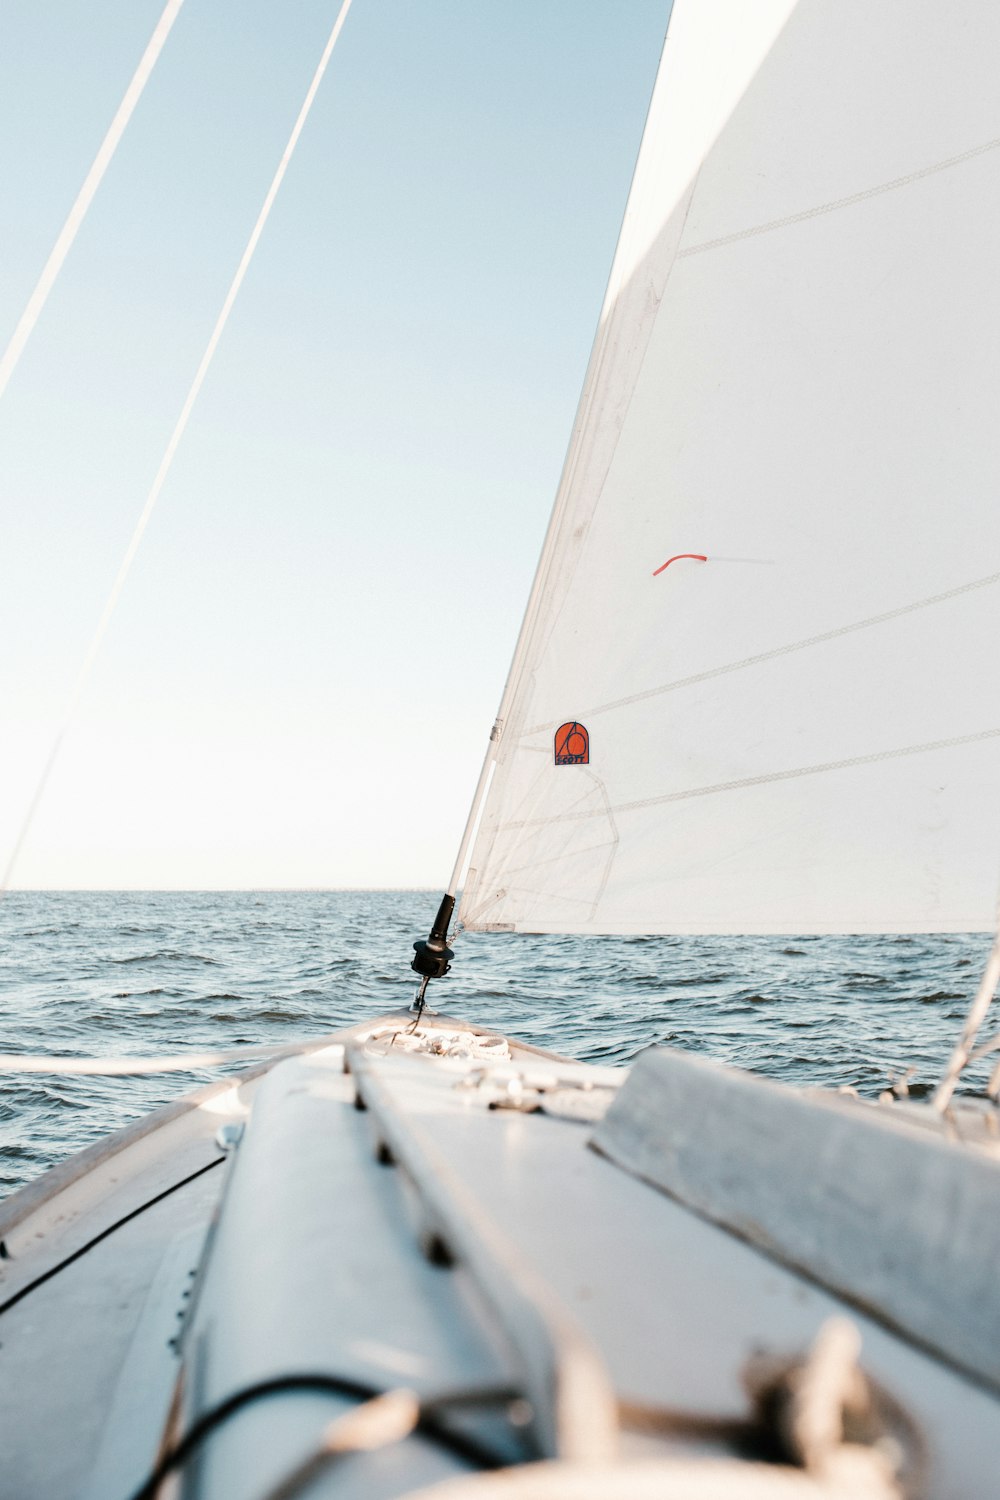 100+ Sailing Pictures Download Free Images on Unsplash